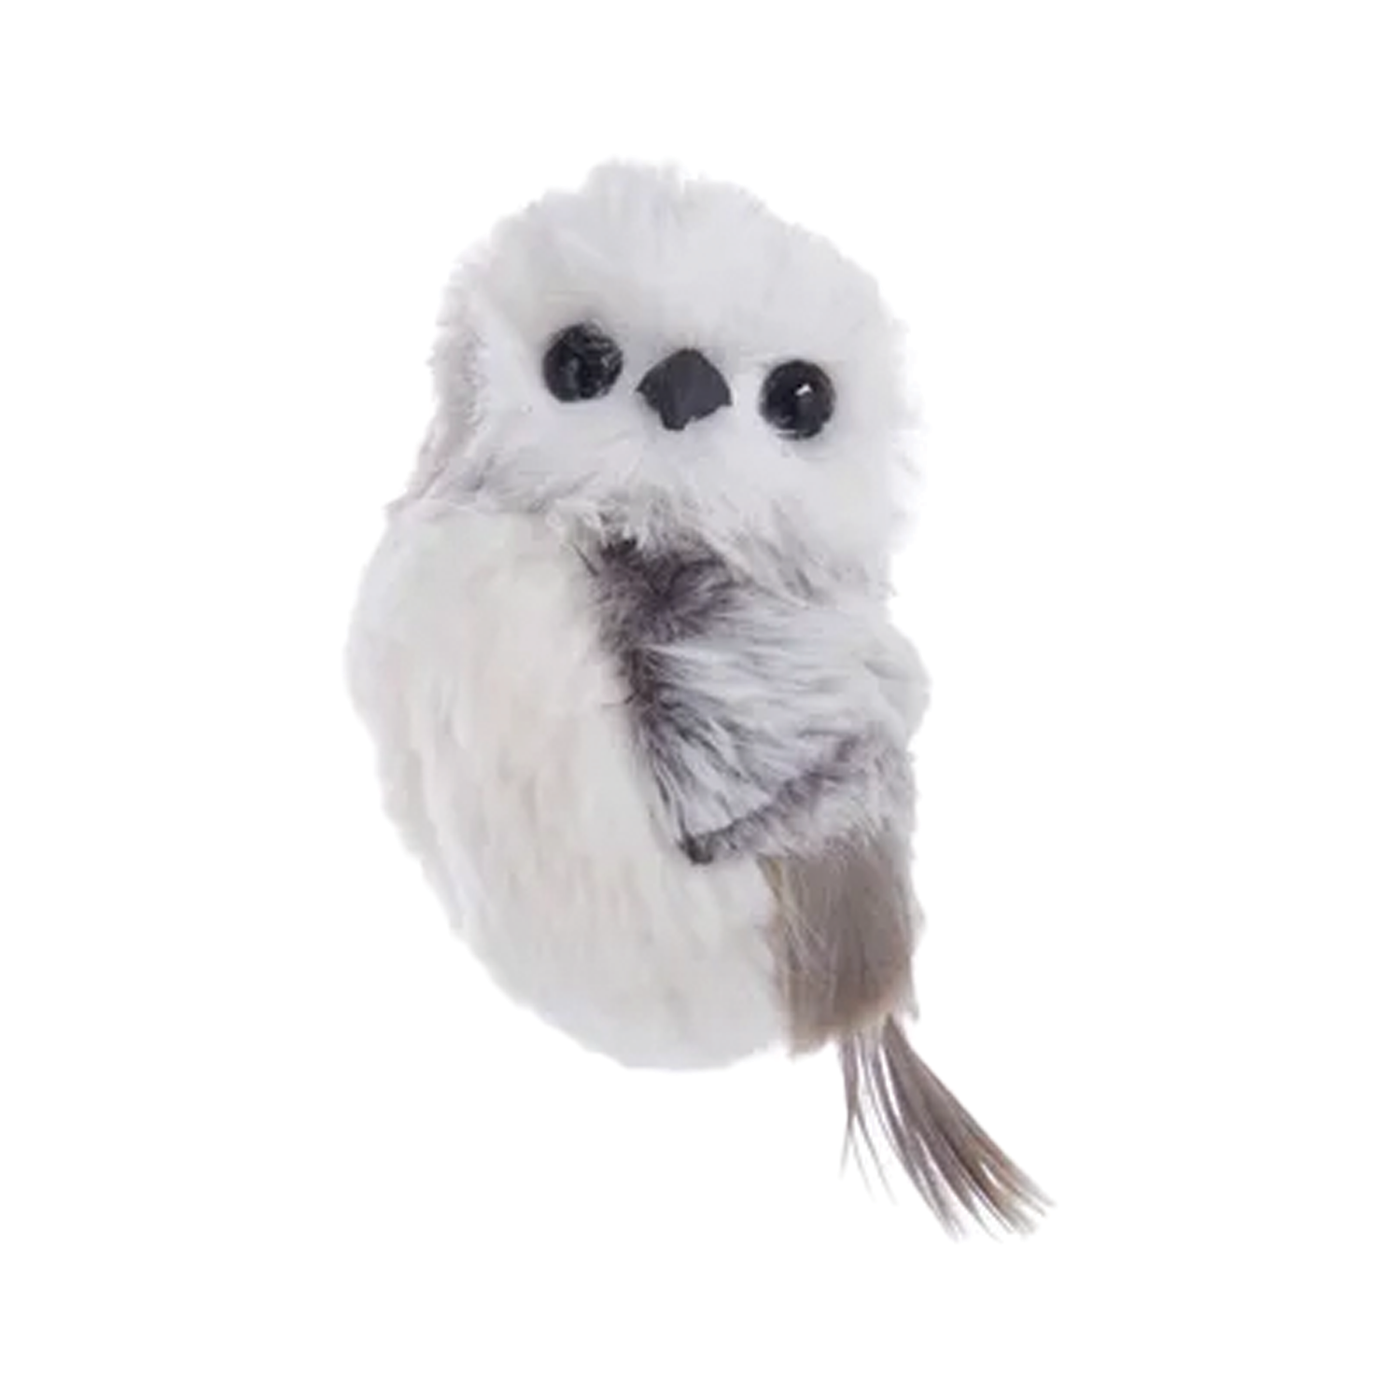 Grey With White Fur Hanging Owl Ornament - Looking Left